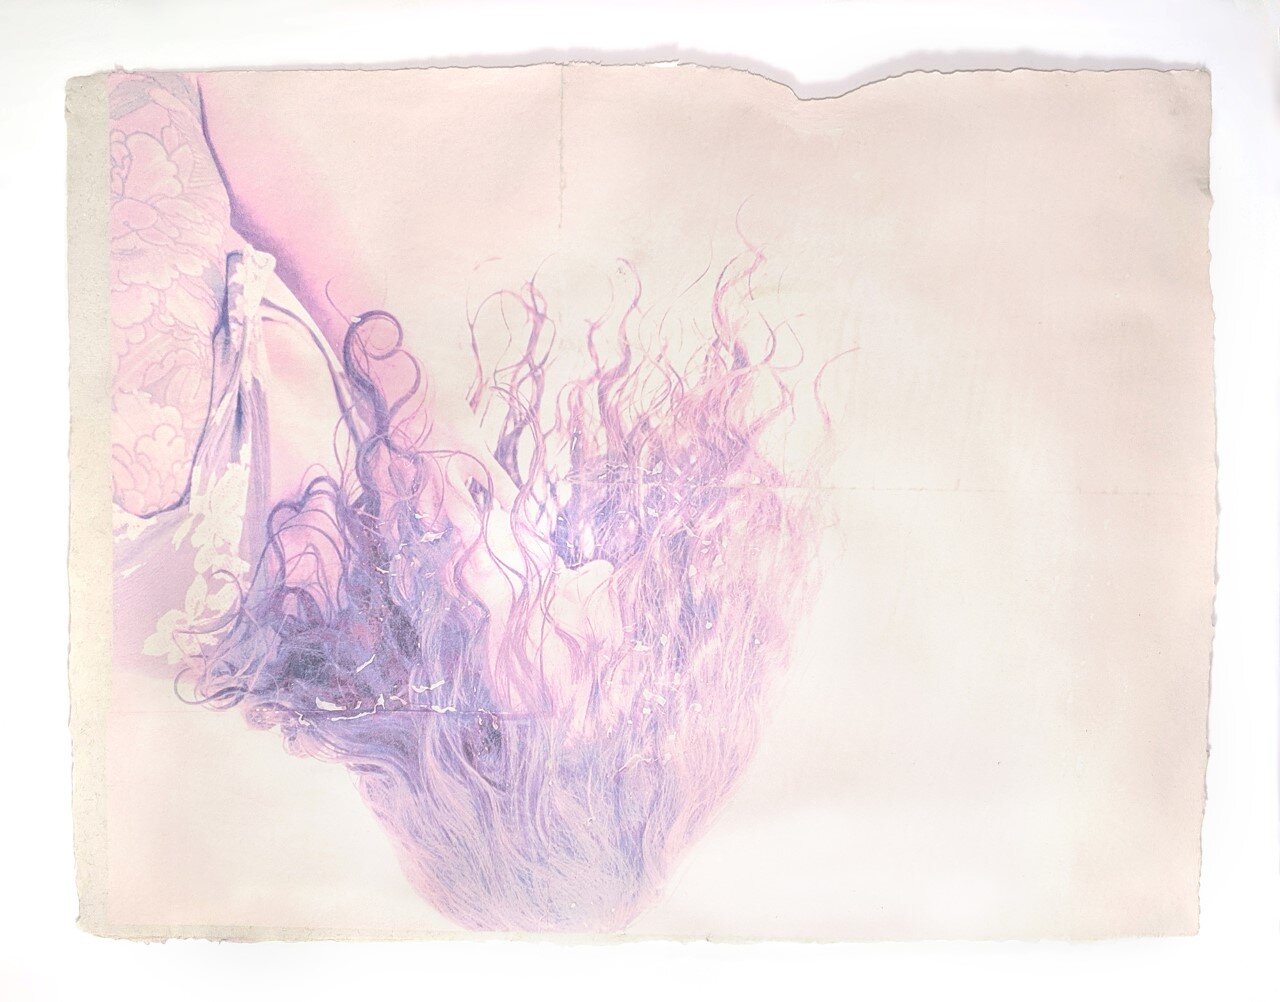  Kayla Story   Timeless , 2020  From the series: All That is Solid Melts into Air  Handmade paper, digital image pressure transfer, watercolor 